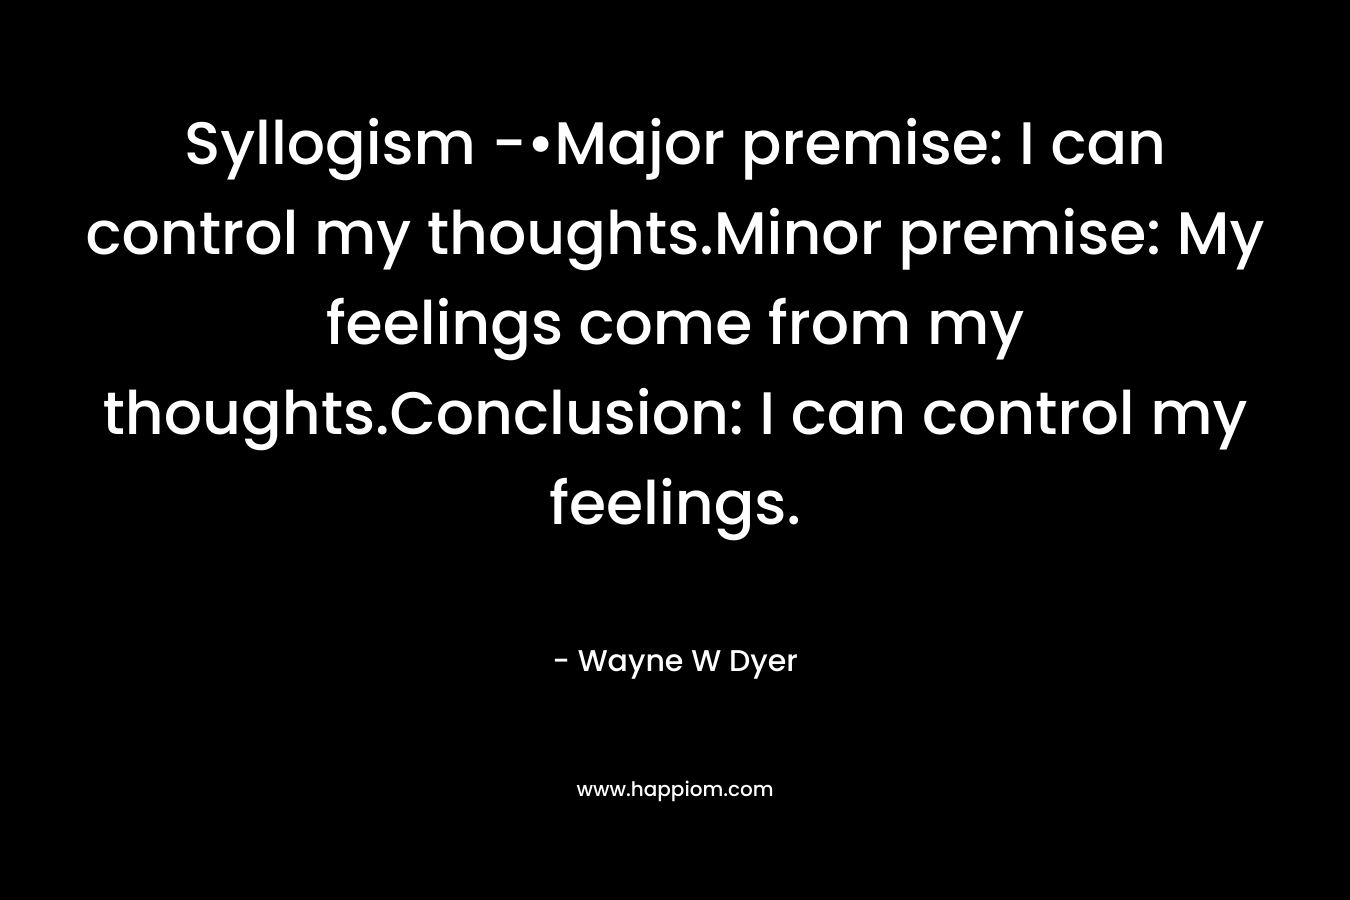 Syllogism -•Major premise: I can control my thoughts.Minor premise: My feelings come from my thoughts.Conclusion: I can control my feelings. – Wayne W Dyer